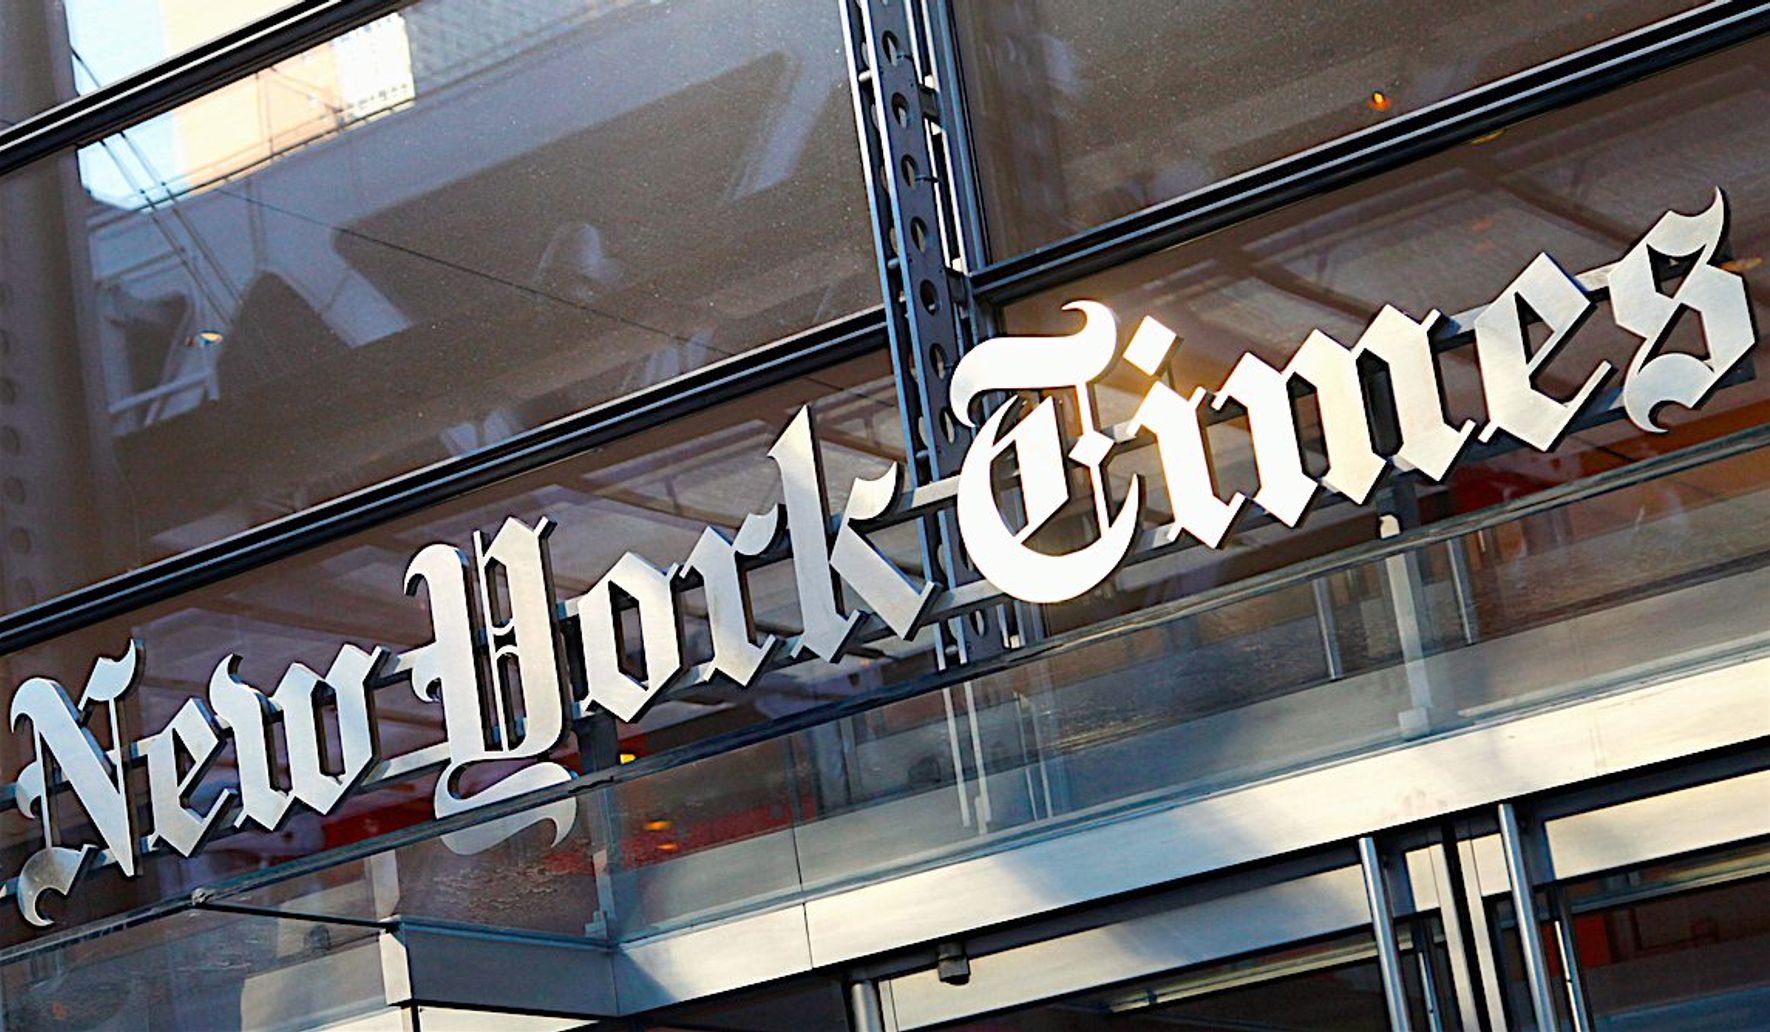 New York Times falls from 'newspaper of record' to joke - Washington Times